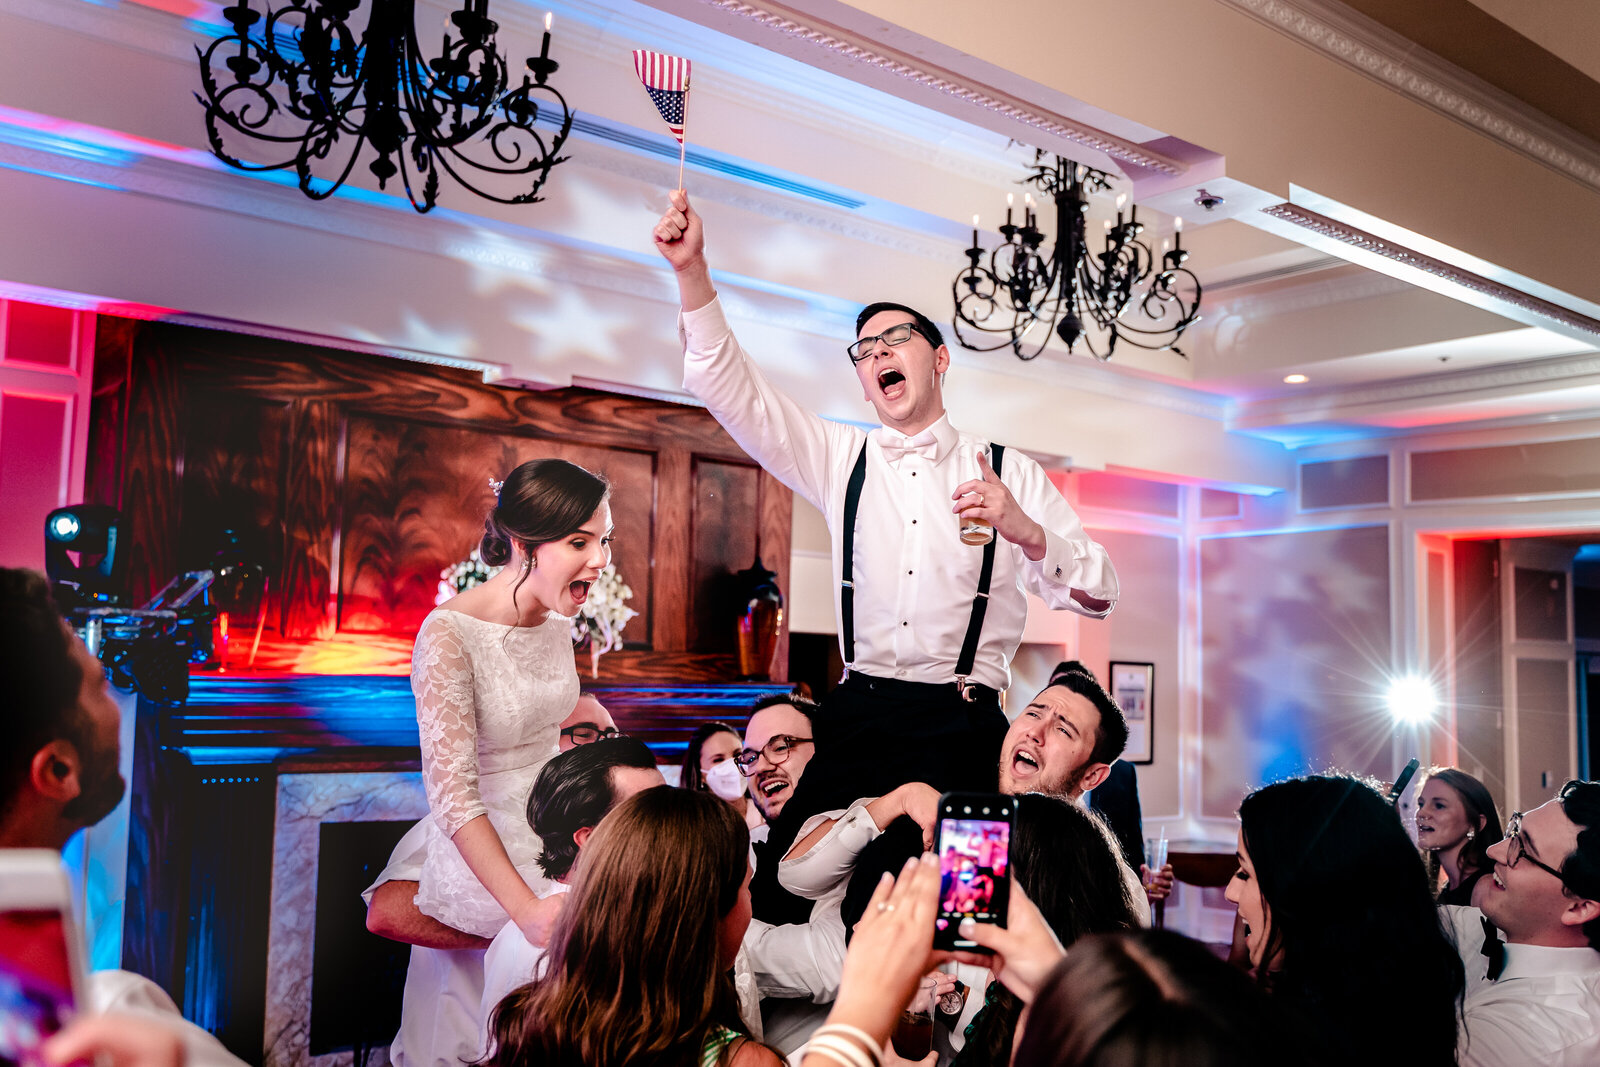 A group singing along to a patriotic song during a wedding at The Country Club of Fairfax in Northern Virginia